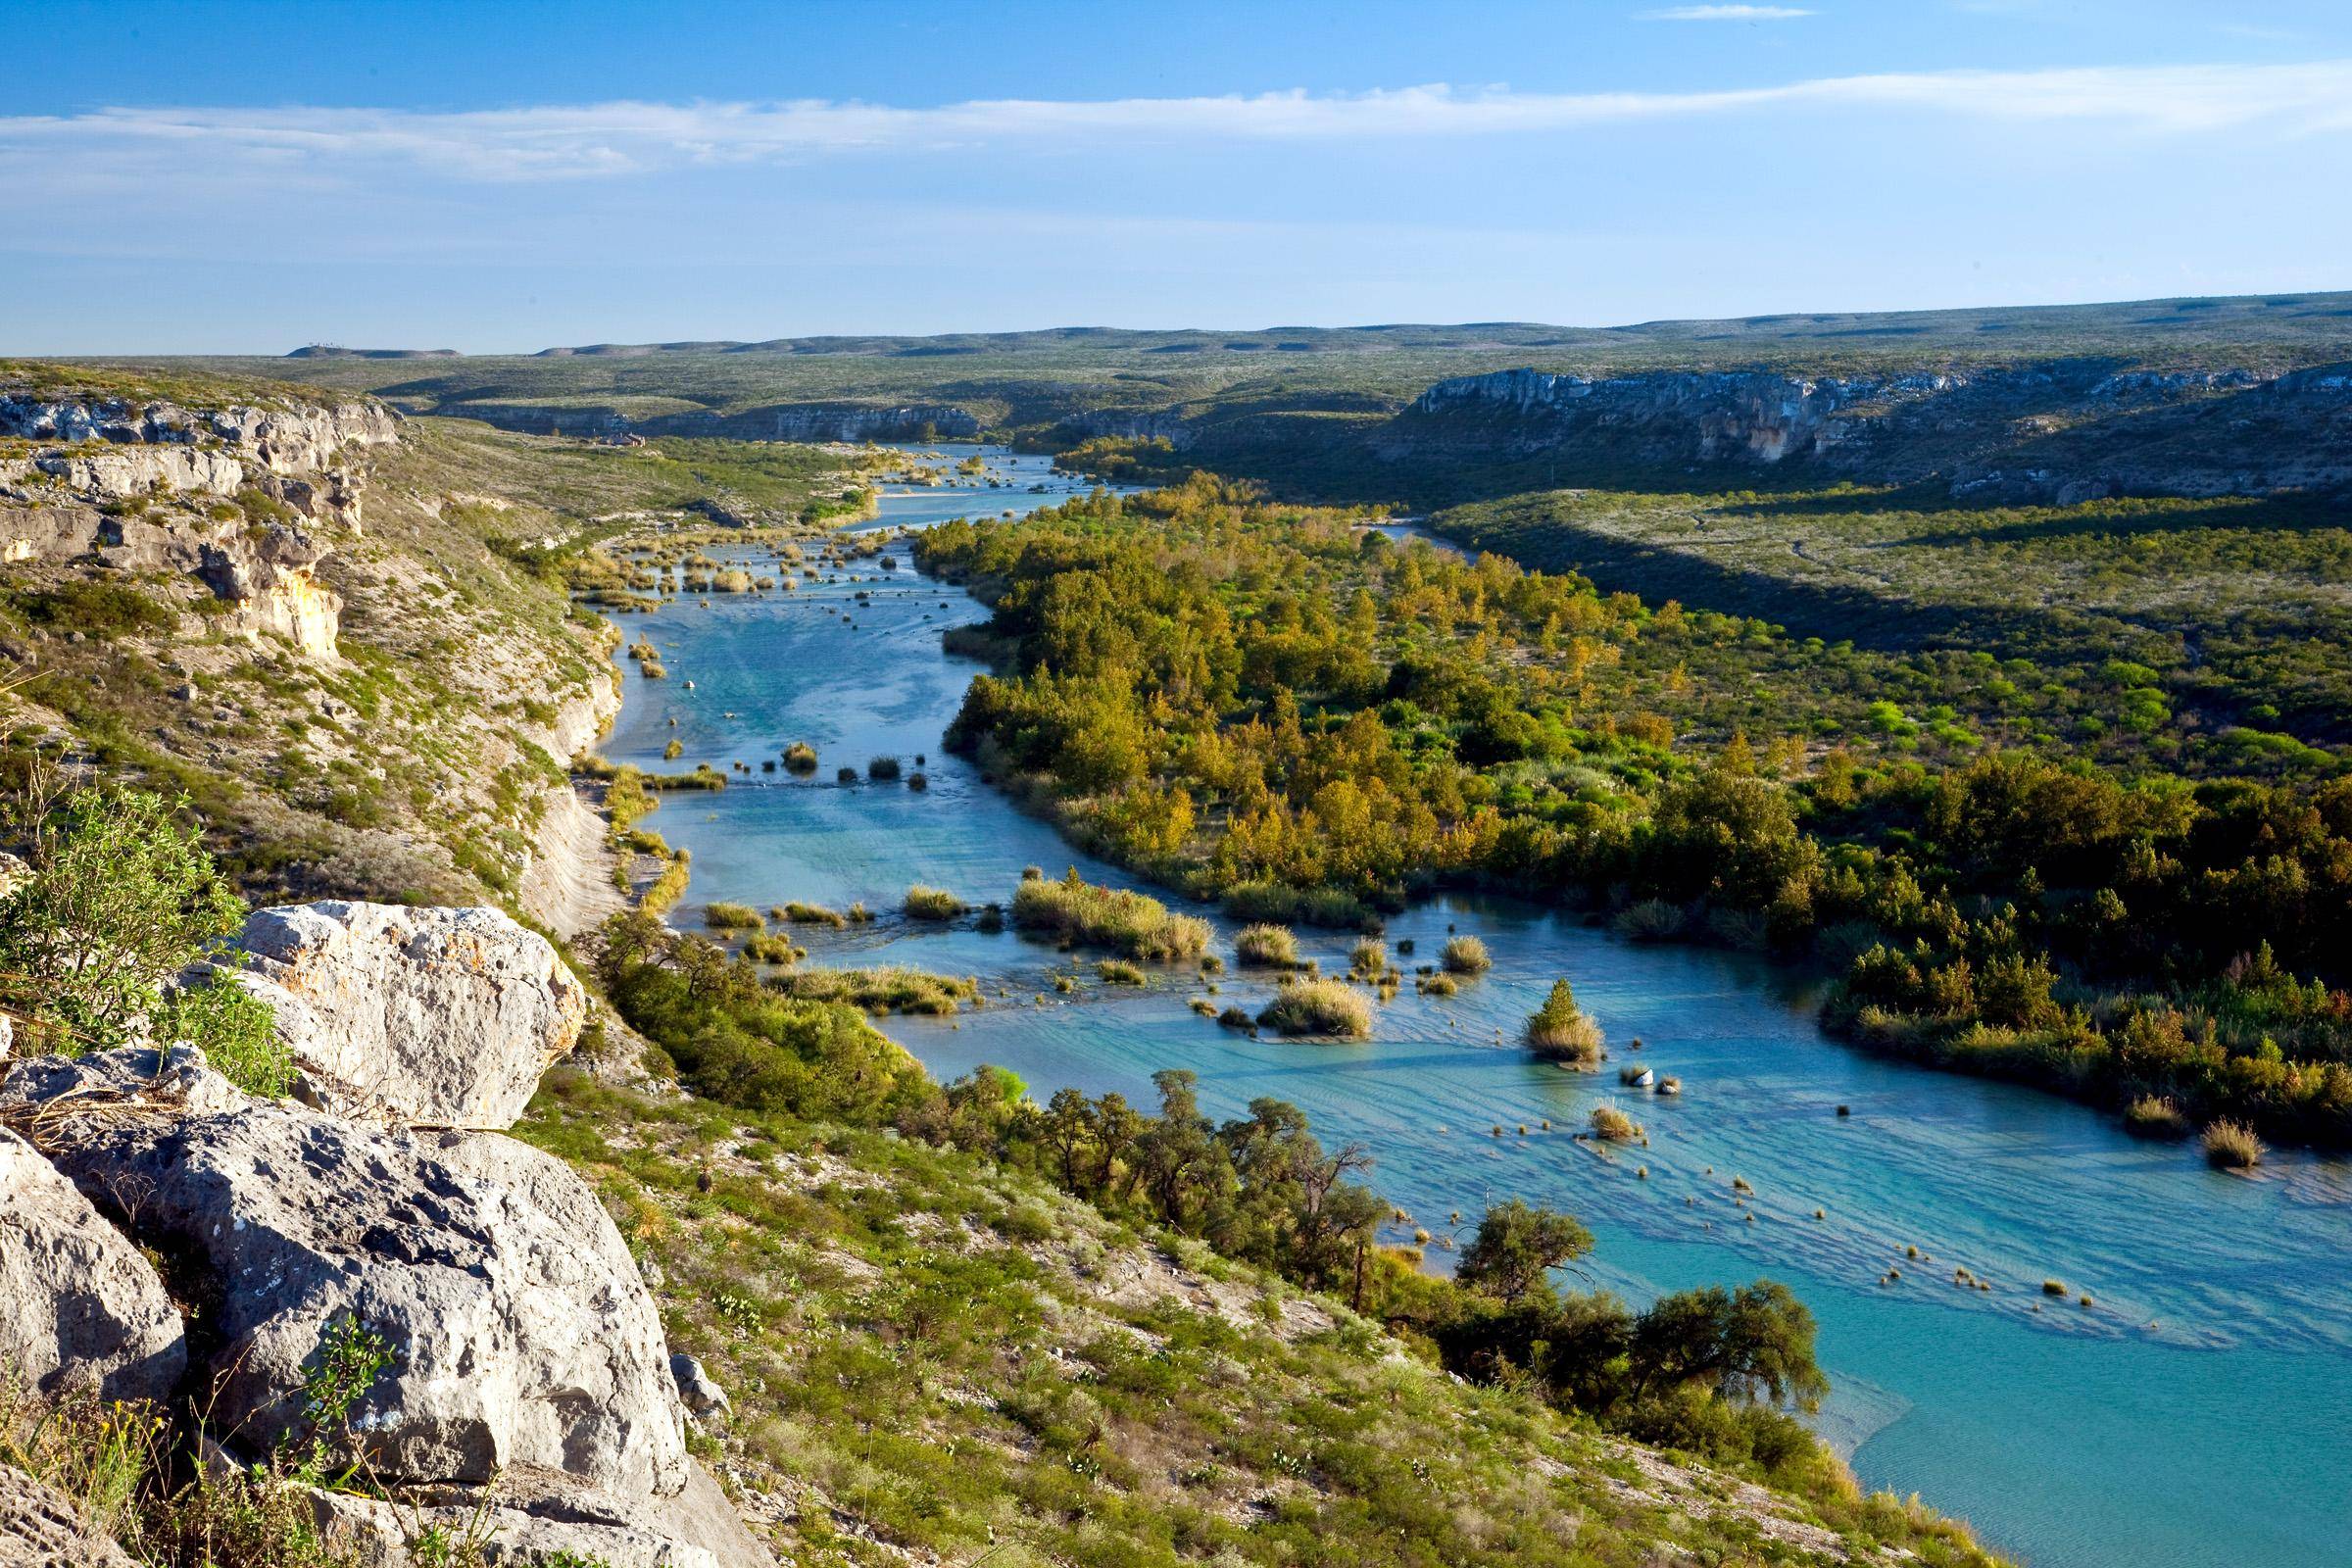 devils_river_ranch_wide_view_of_river_from_cliff_edge--~laurence_parent.jpg